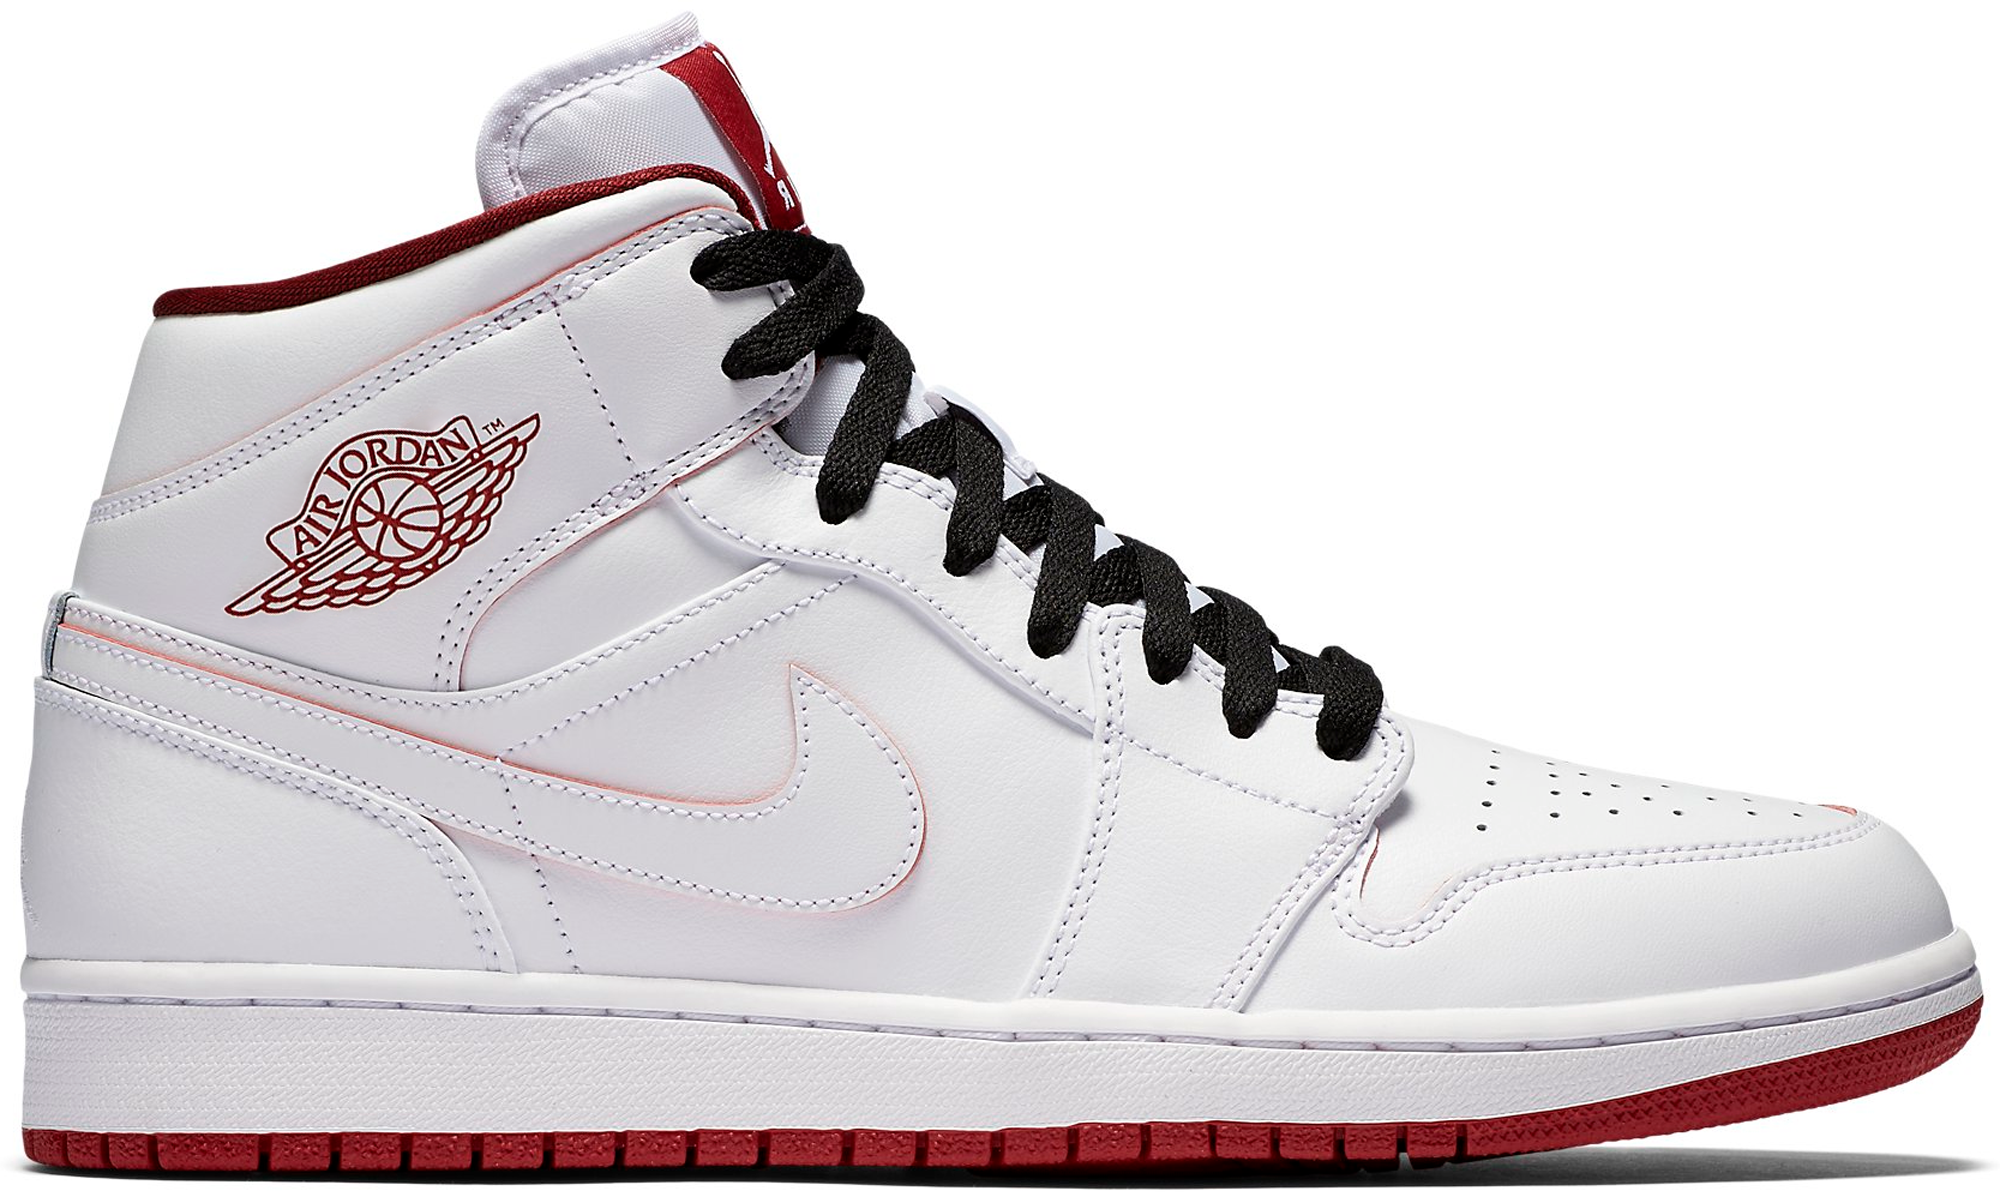 jordan 1 red and white mid